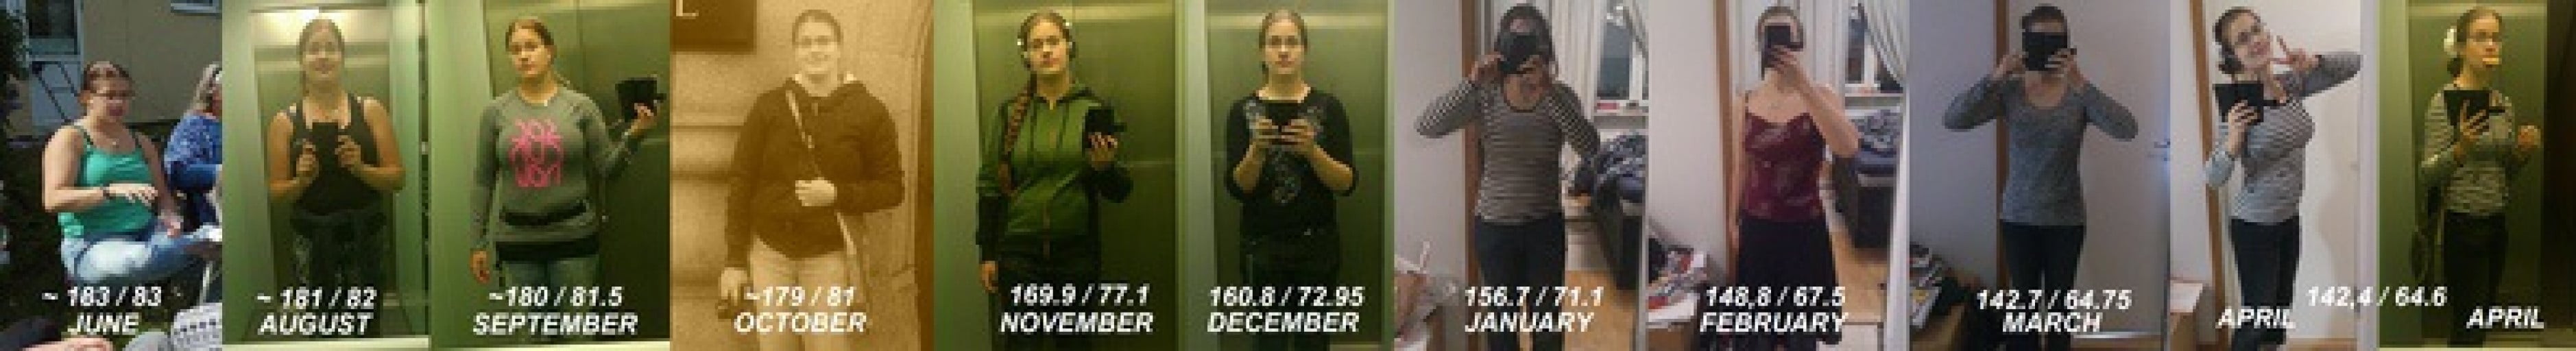 A photo of a 5'7" woman showing a weight cut from 183 pounds to 142 pounds. A respectable loss of 41 pounds.